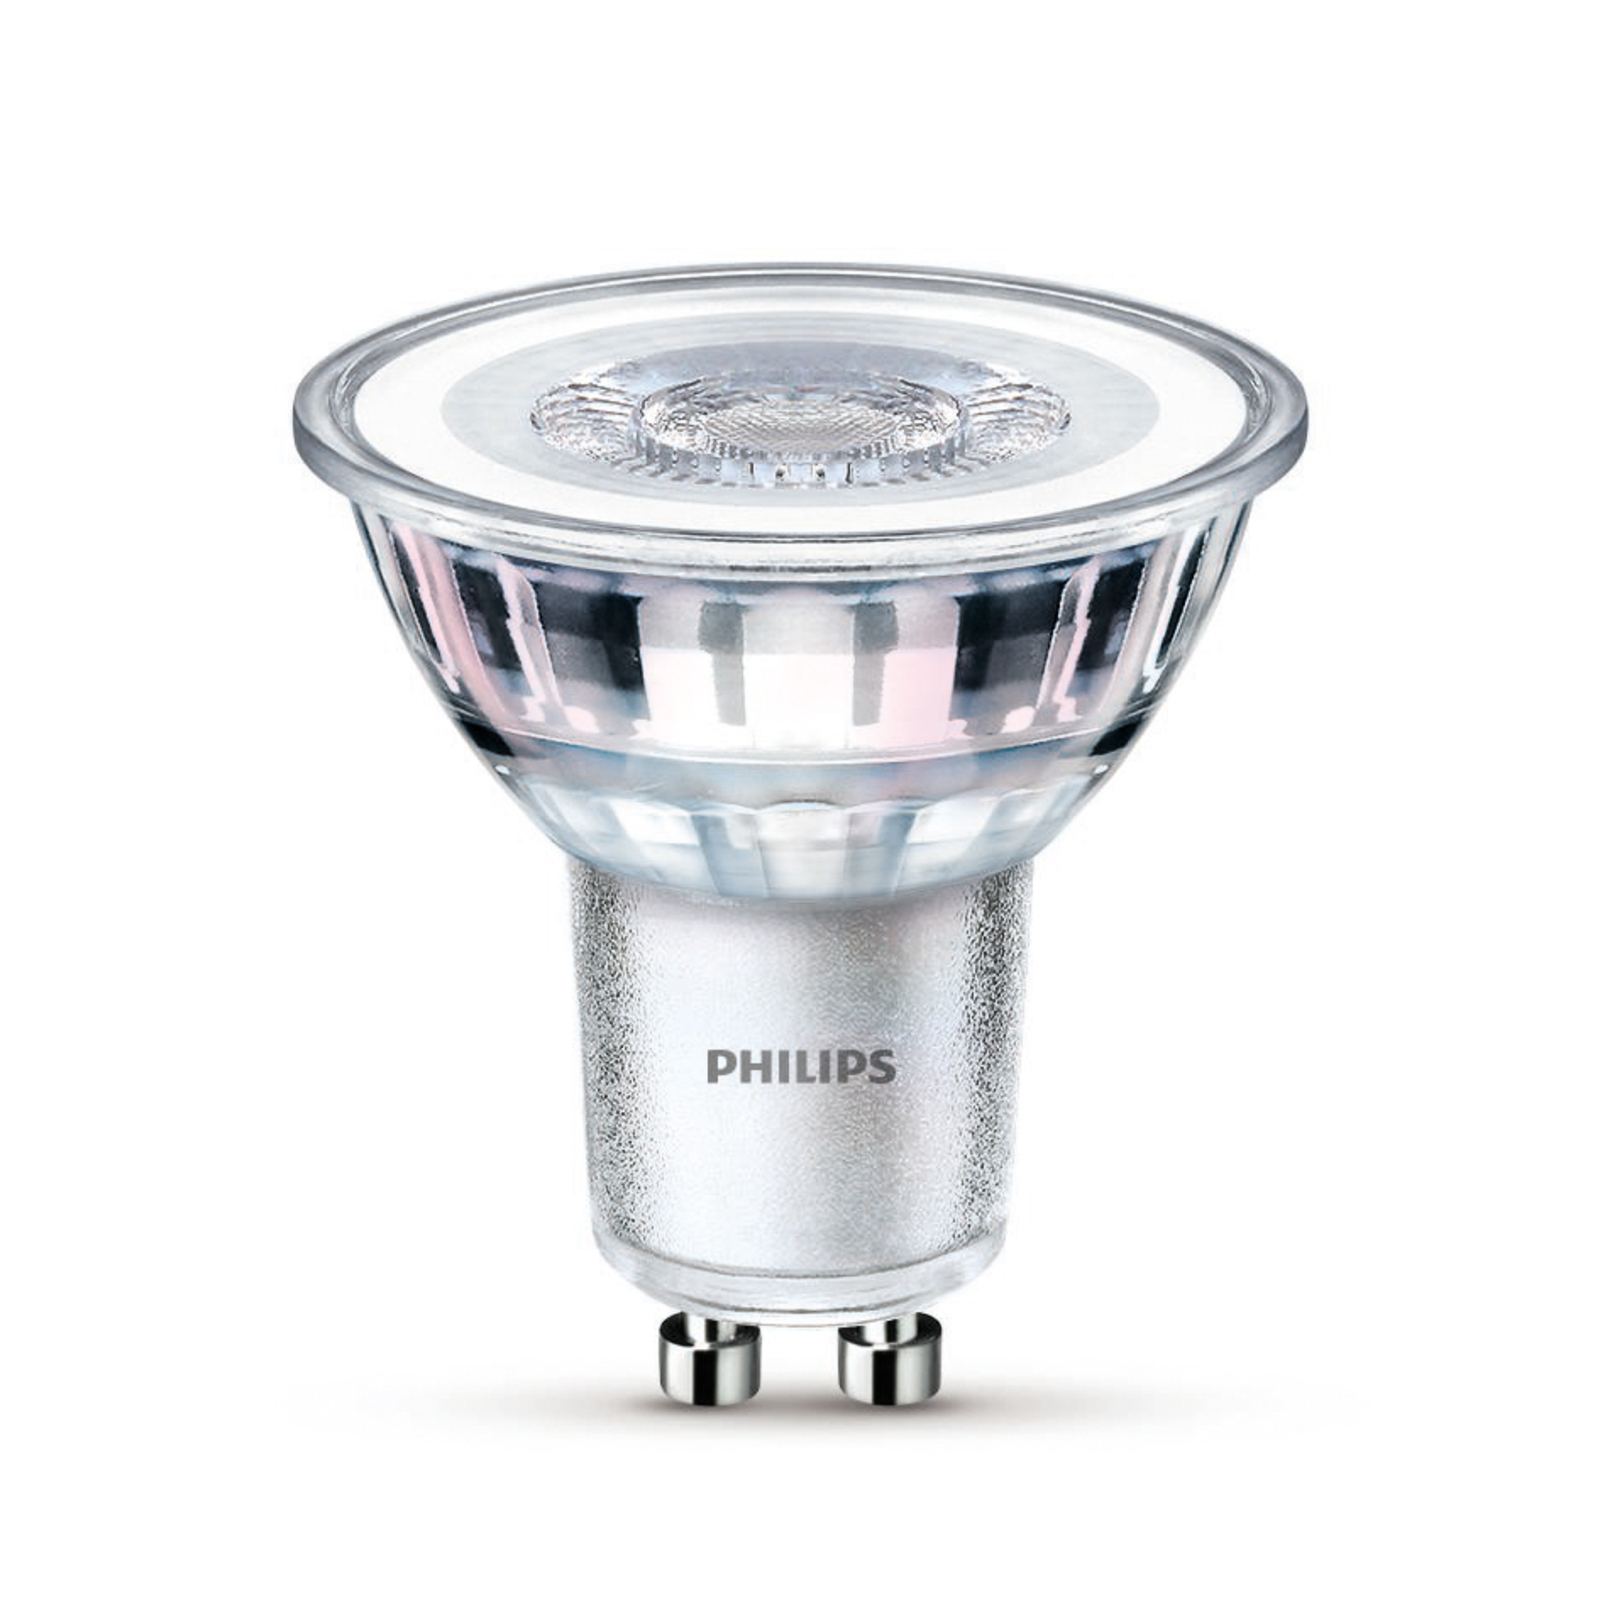 Philips LED GU10 4,6 W 355lm 827 claire 36° x3